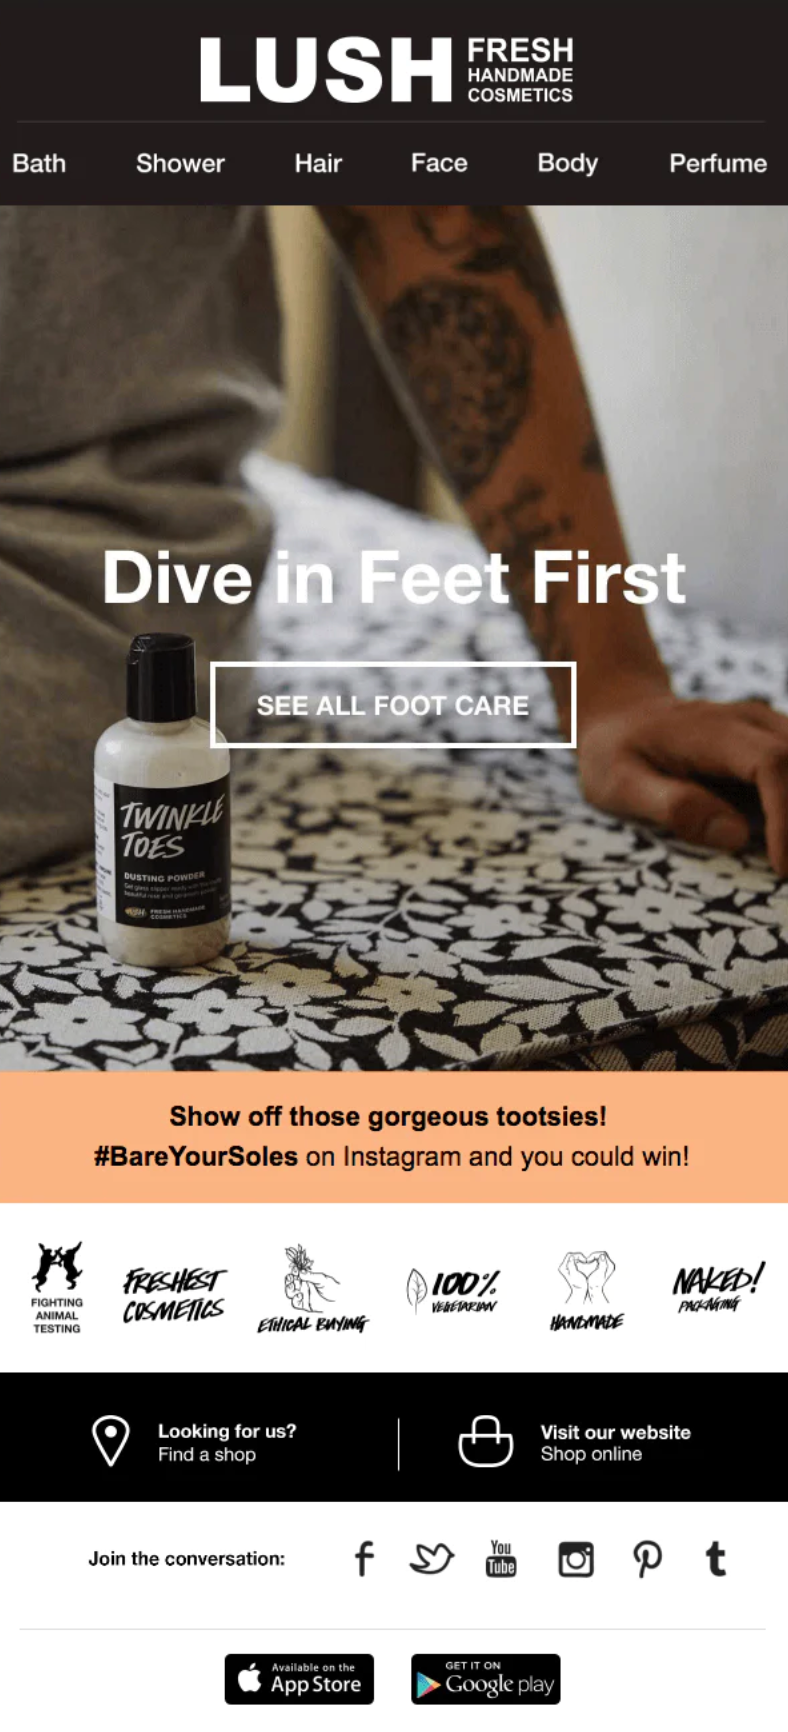 Lush email encouraging customers to share an image using the branded hashtag #BareYourSoles.